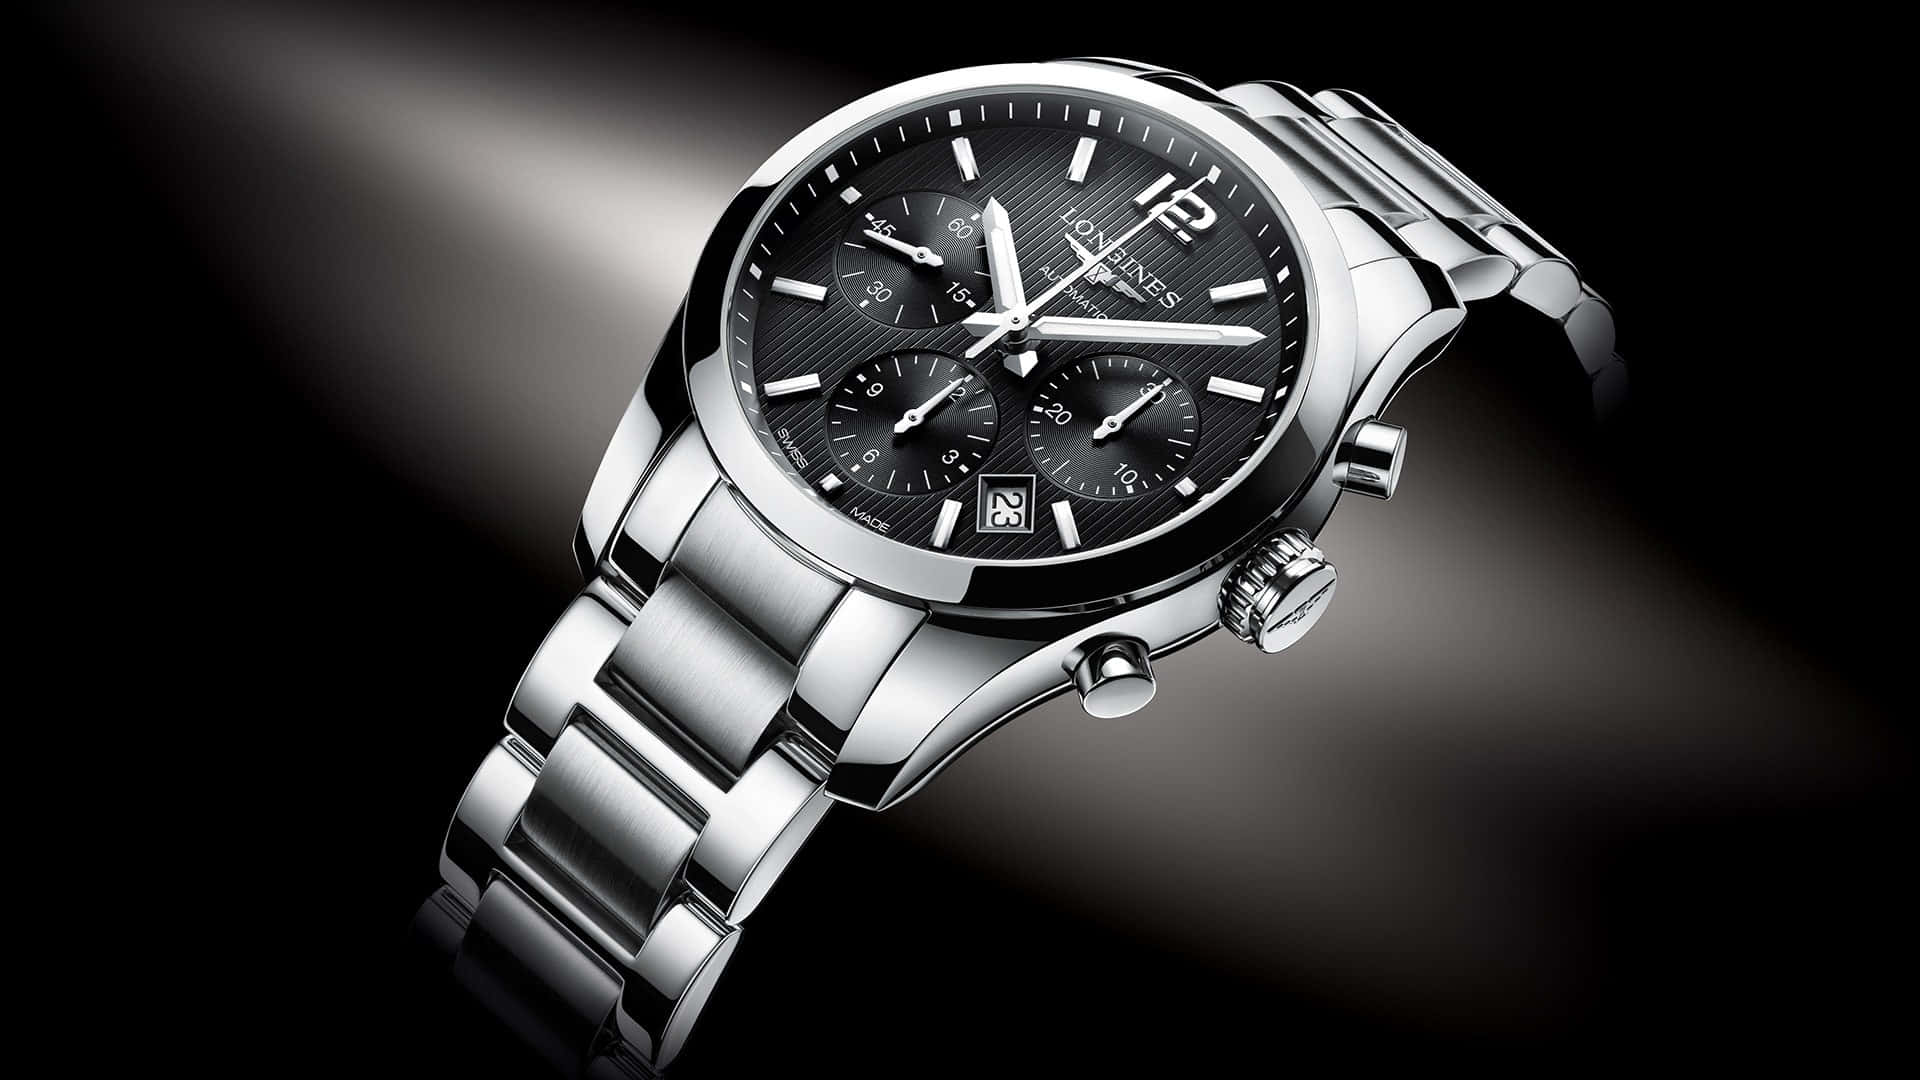 Caption: Luxurious Longines Conquest Classic Chronograph Watch Wallpaper